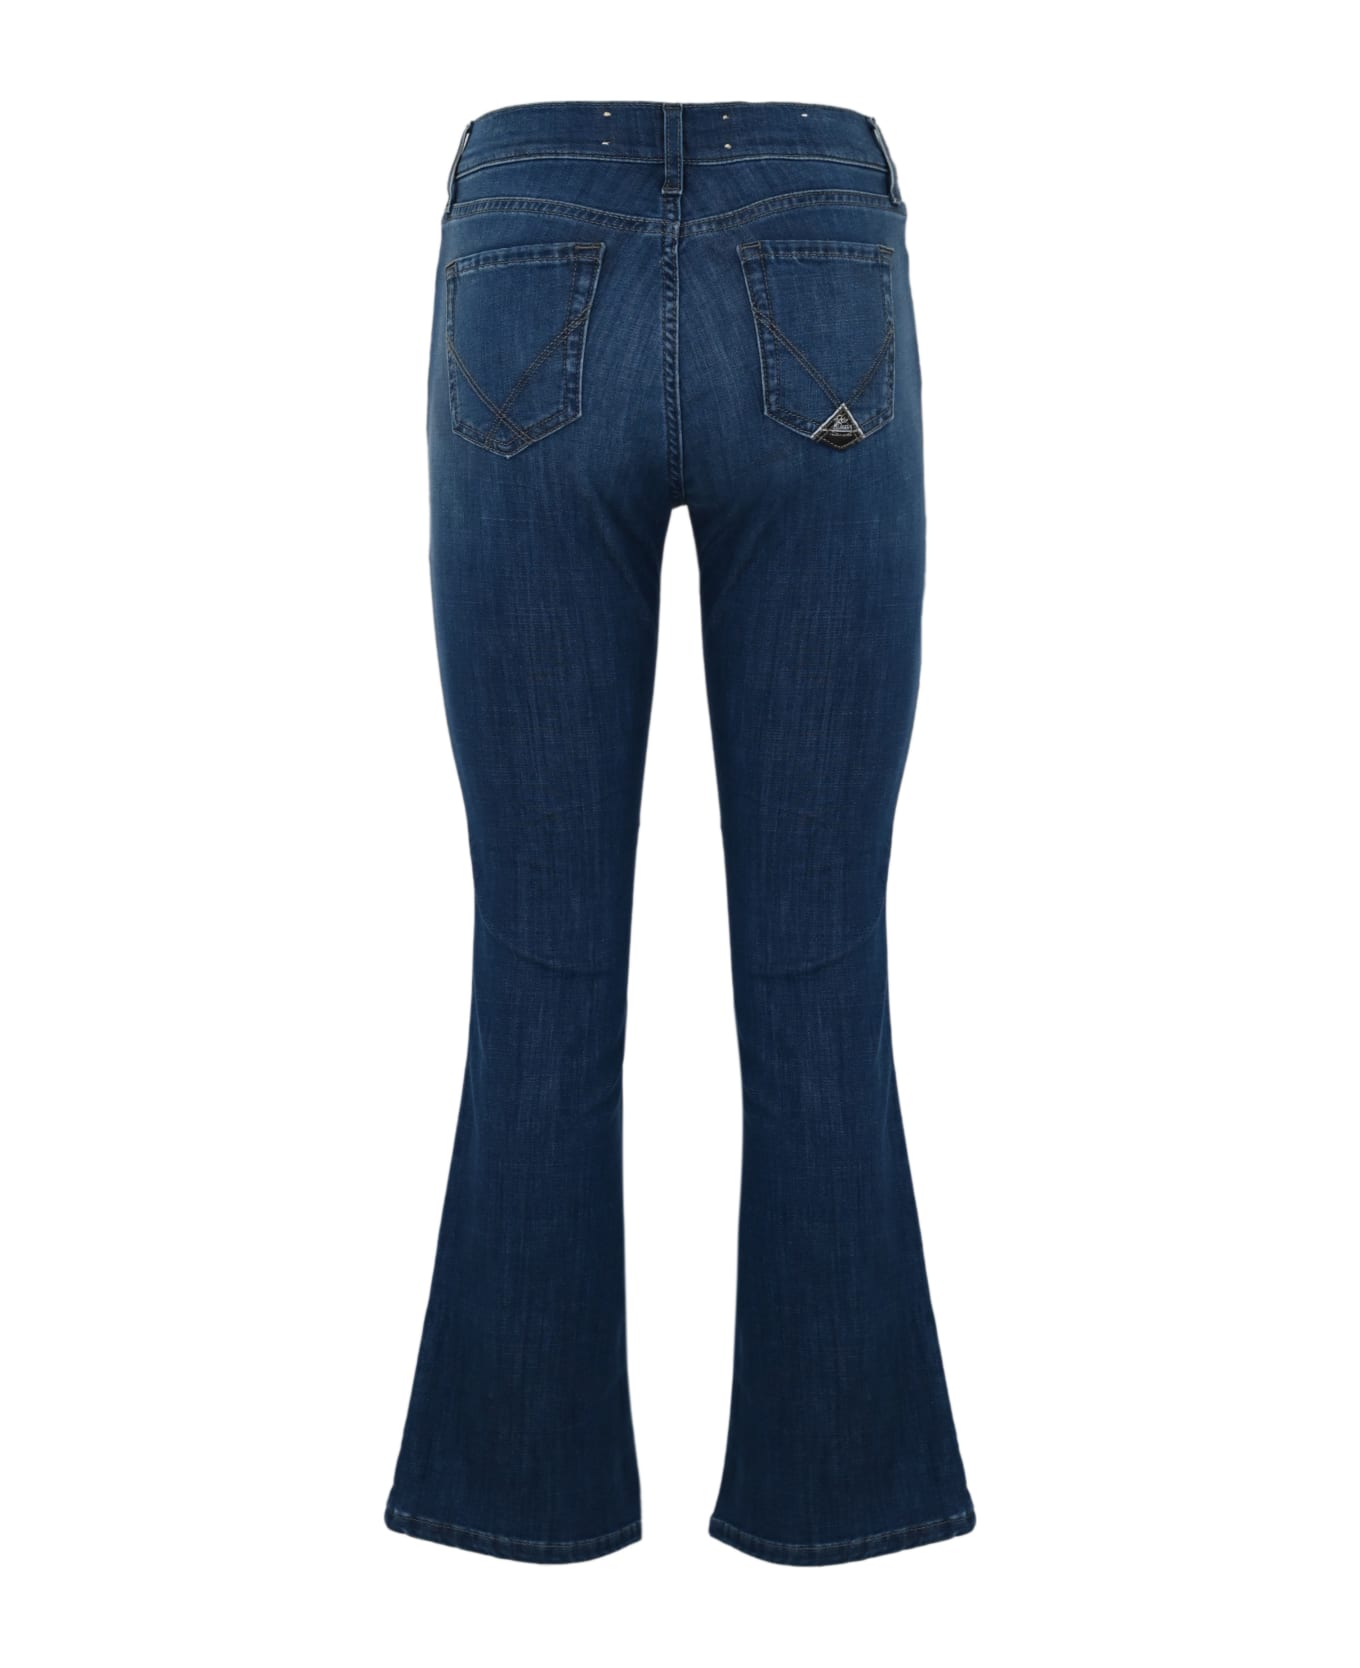 Roy Rogers Flare Cropped Jeans - Denim